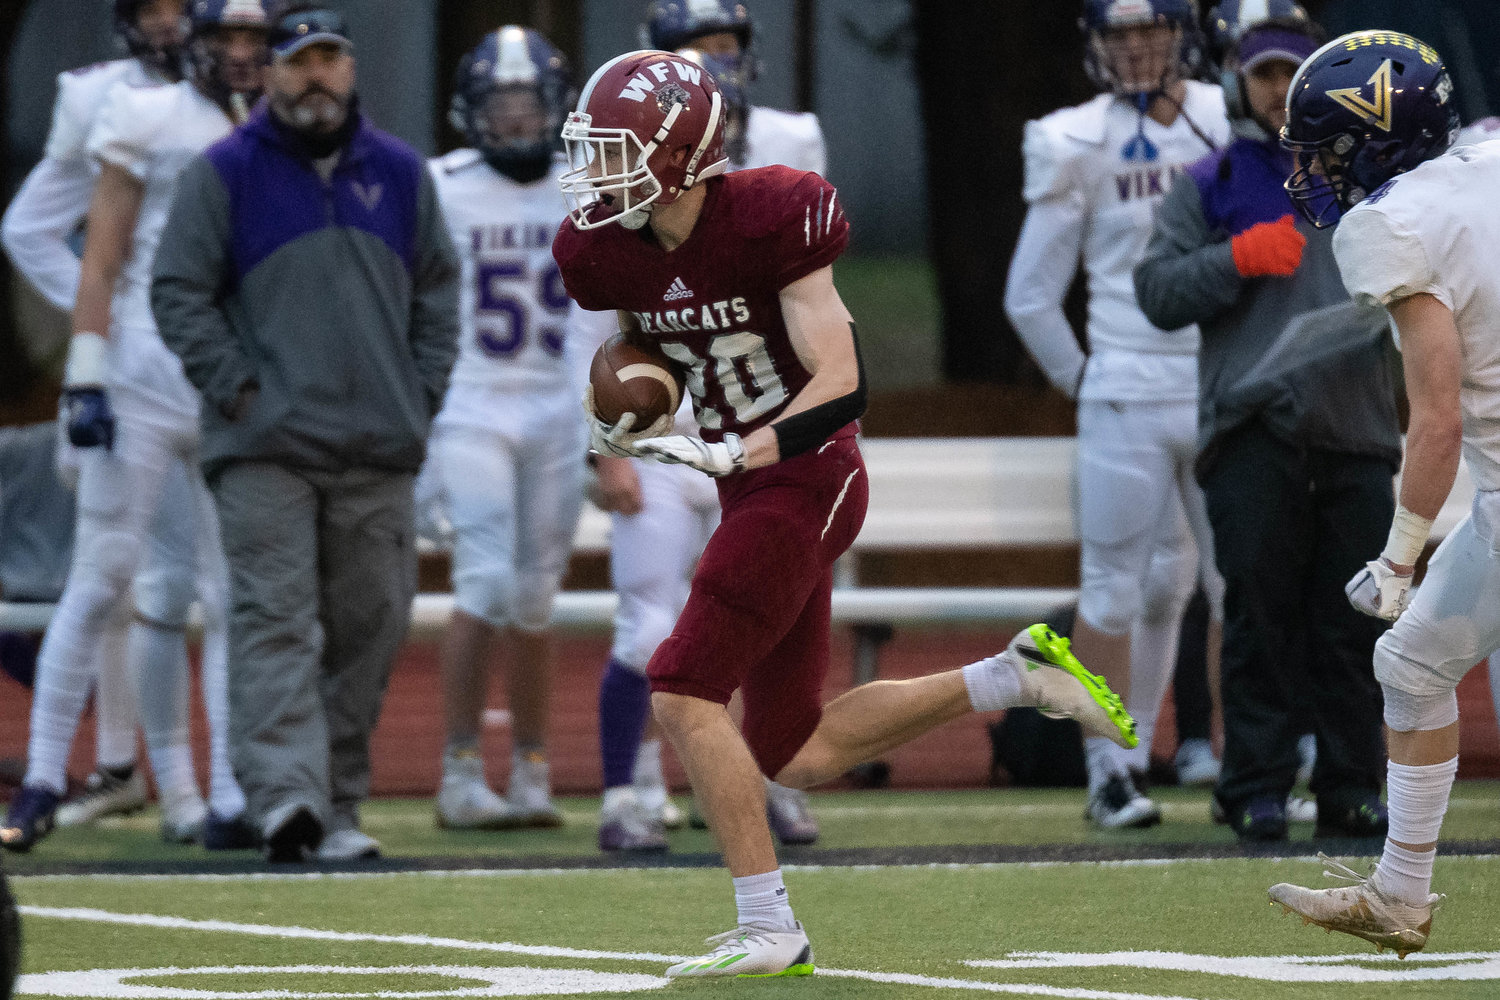 W.F. West receiver Cody Pennington looks for extra yards after a catch against North Kitsap in the 2A state semifinals Nov. 26 at Tumwater District Stadium.